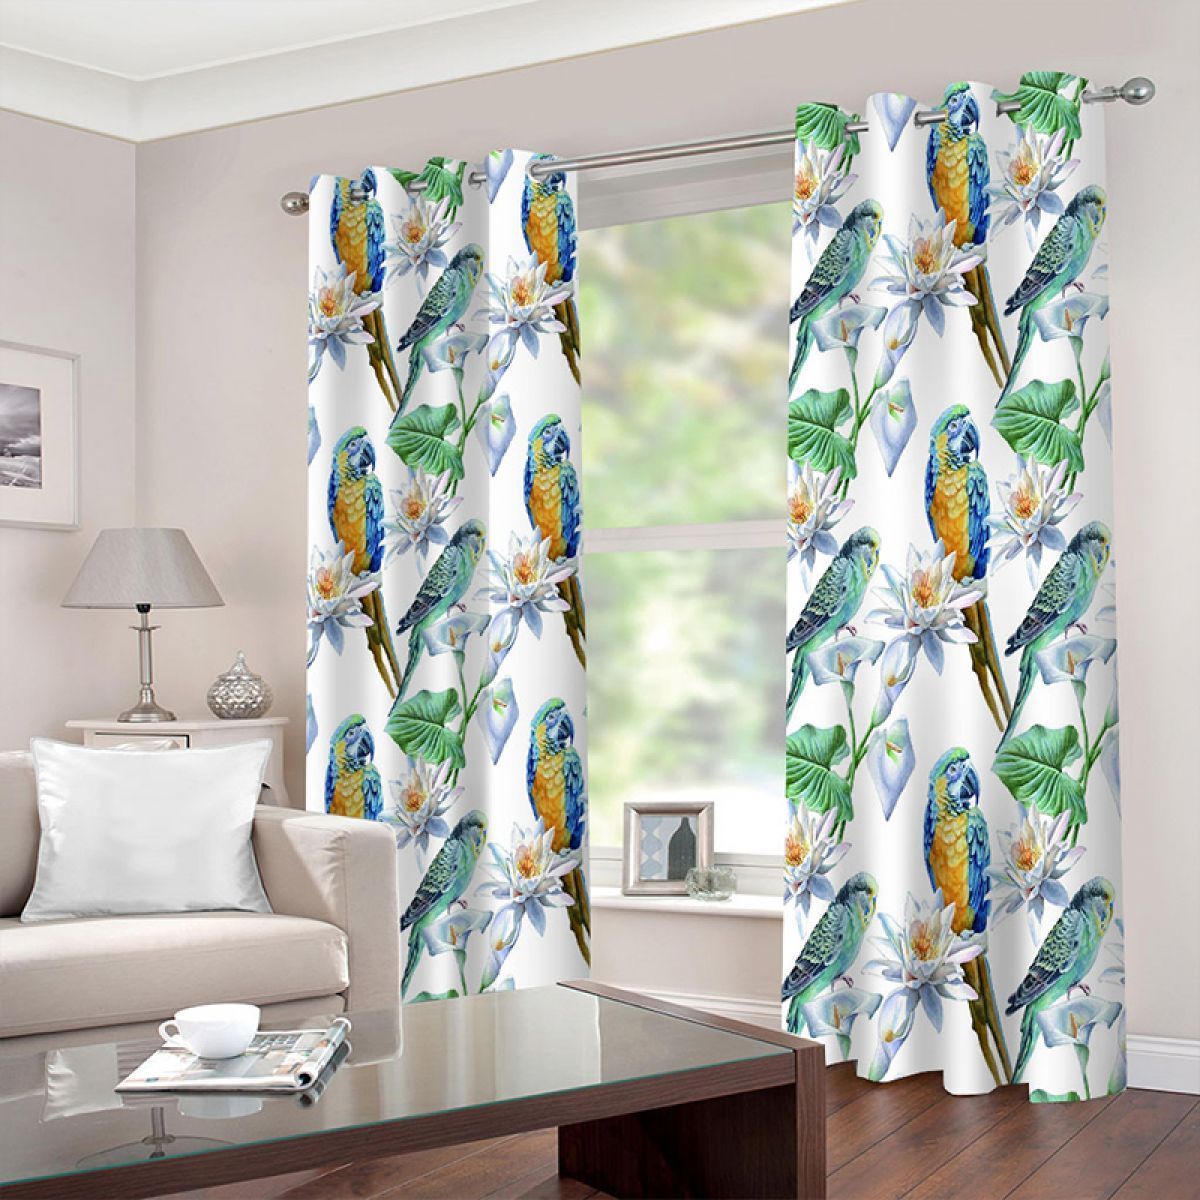 parrots all over printed window curtain home decor 7349